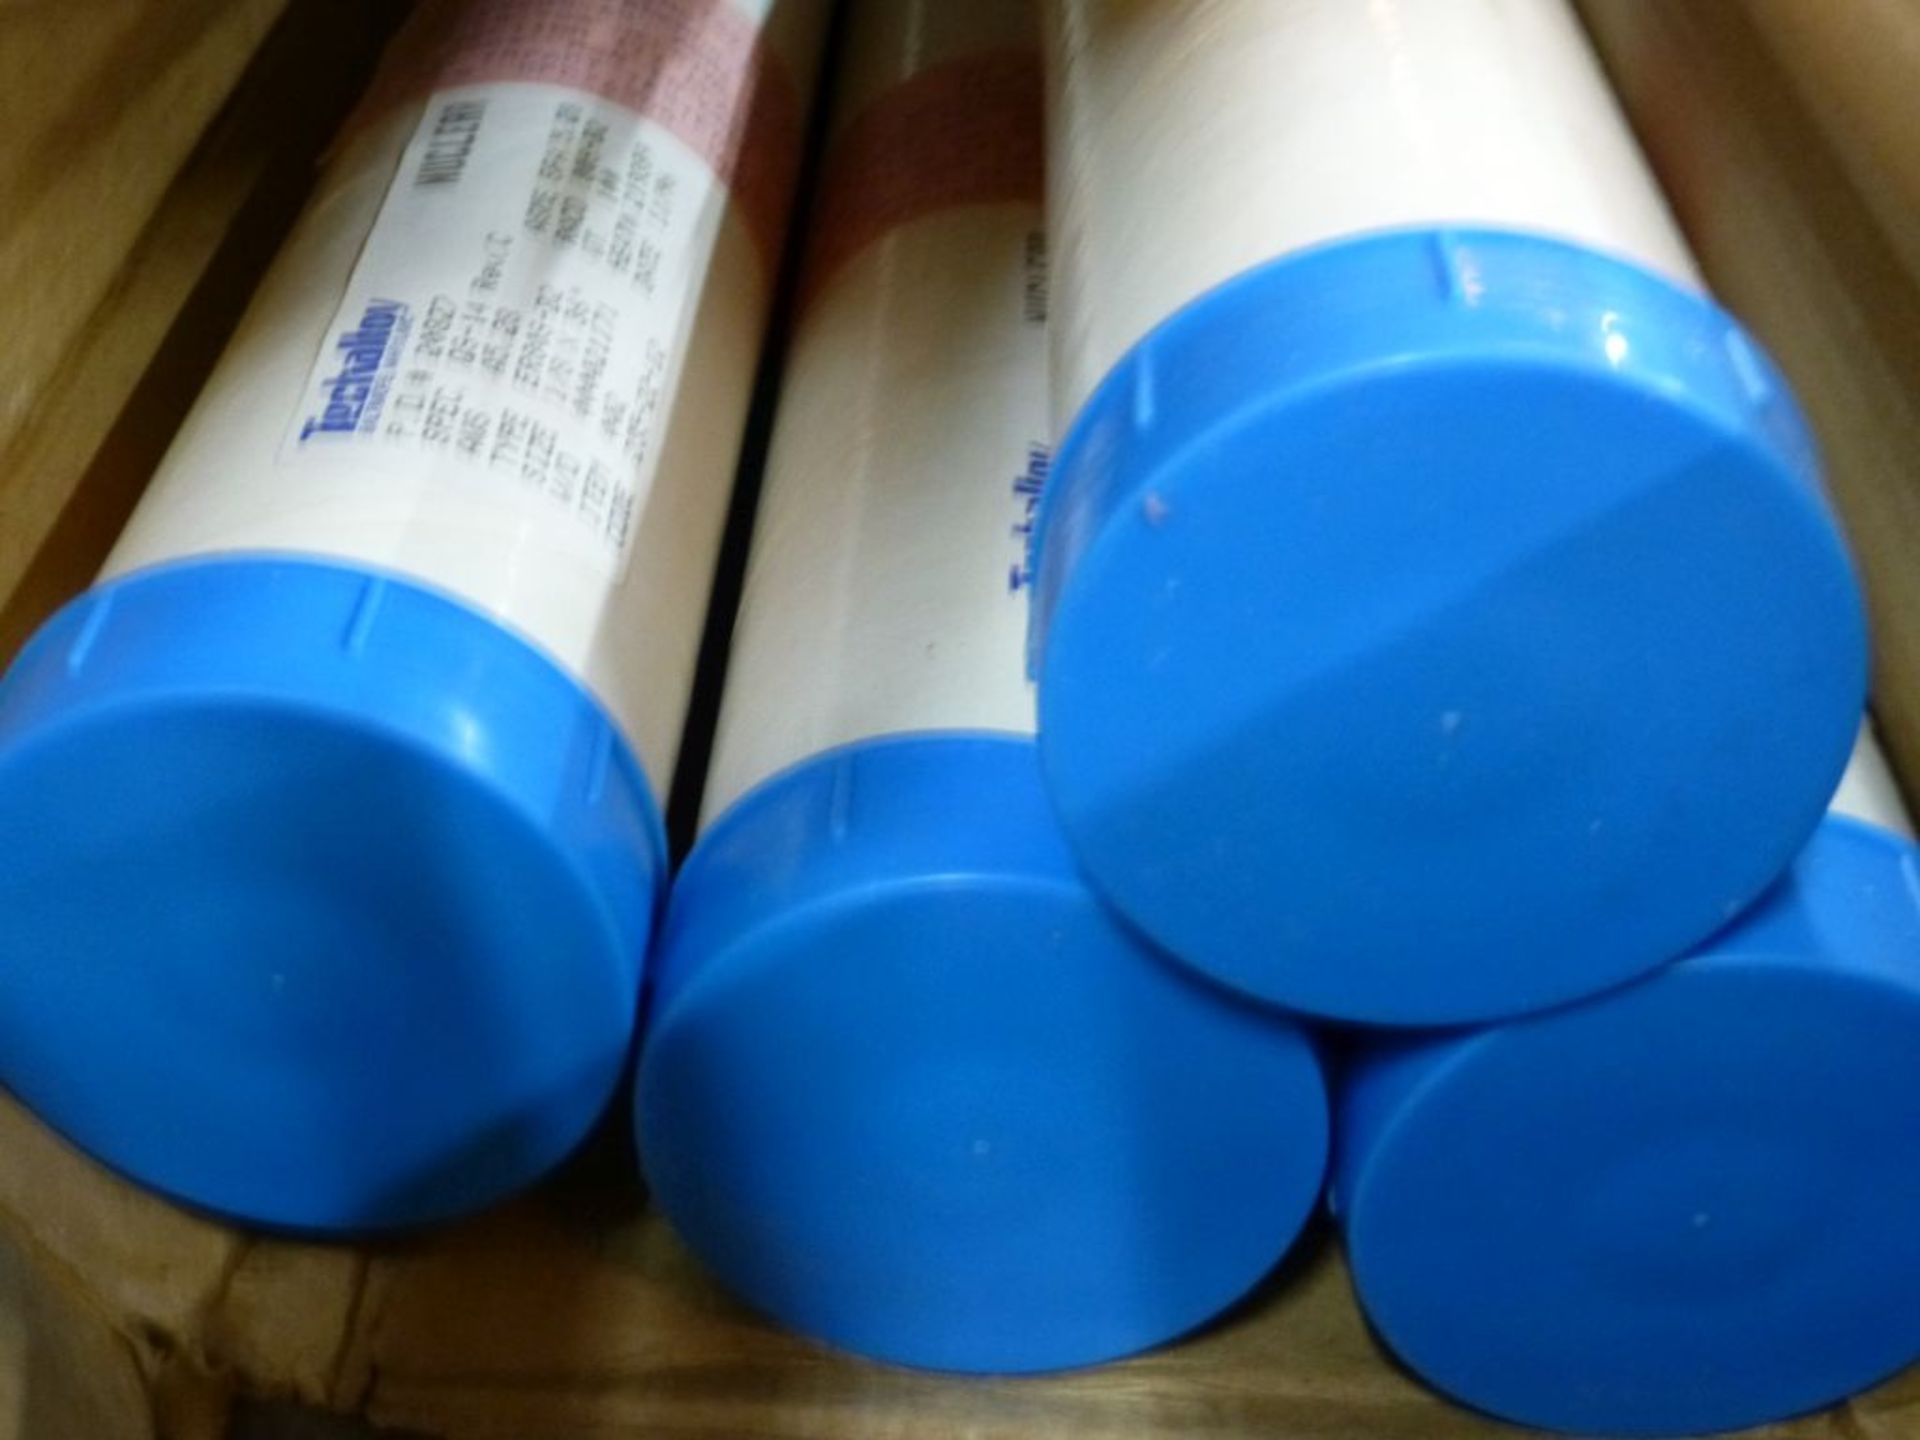 Lot of (2) Boxes of Techalloy Welding Rods|Part No. 20827; Type: ER805-B2; Size: 1/8" x 36" - Image 4 of 7